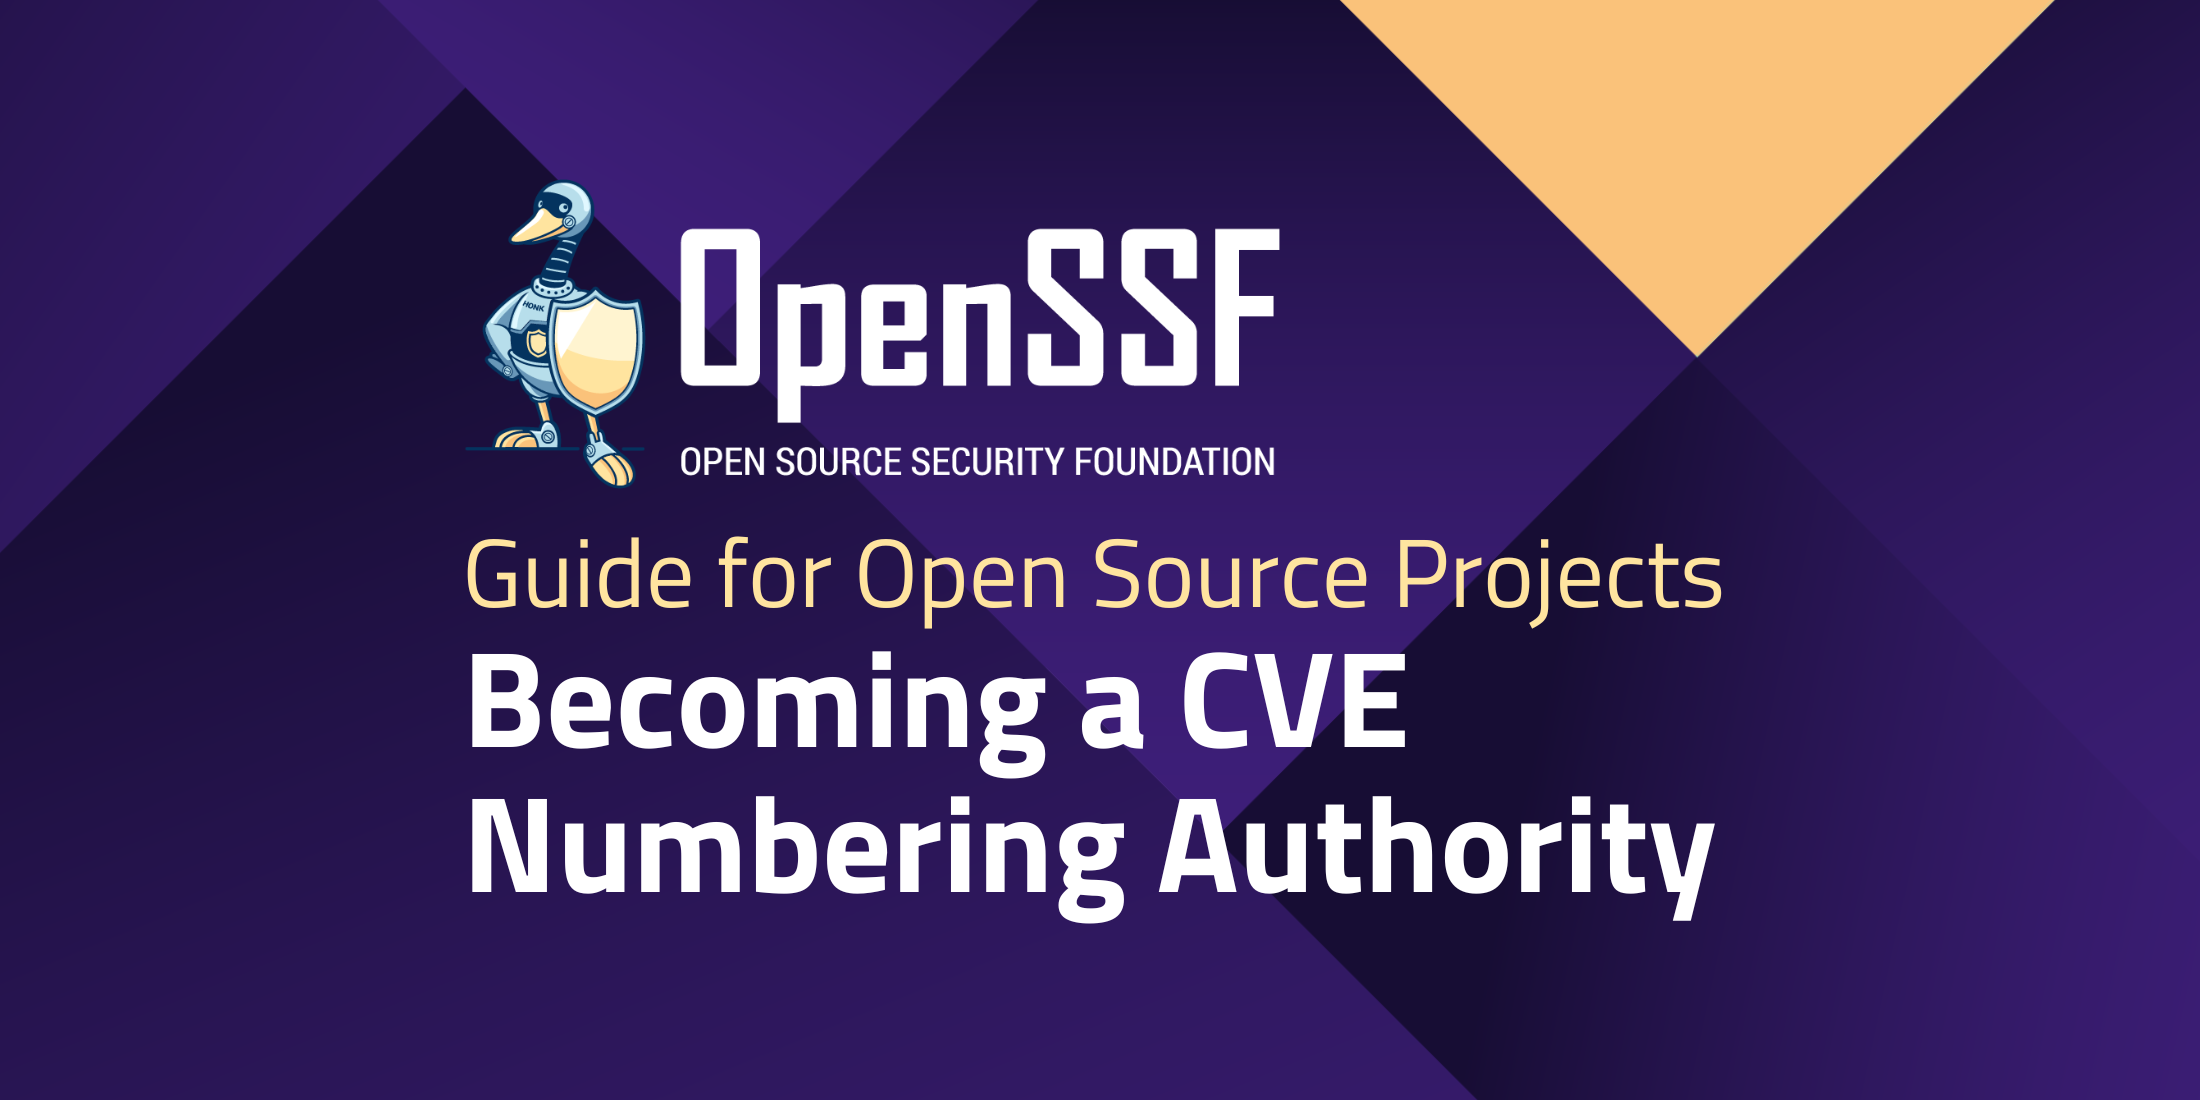 Becoming a CVE Numbering Authority